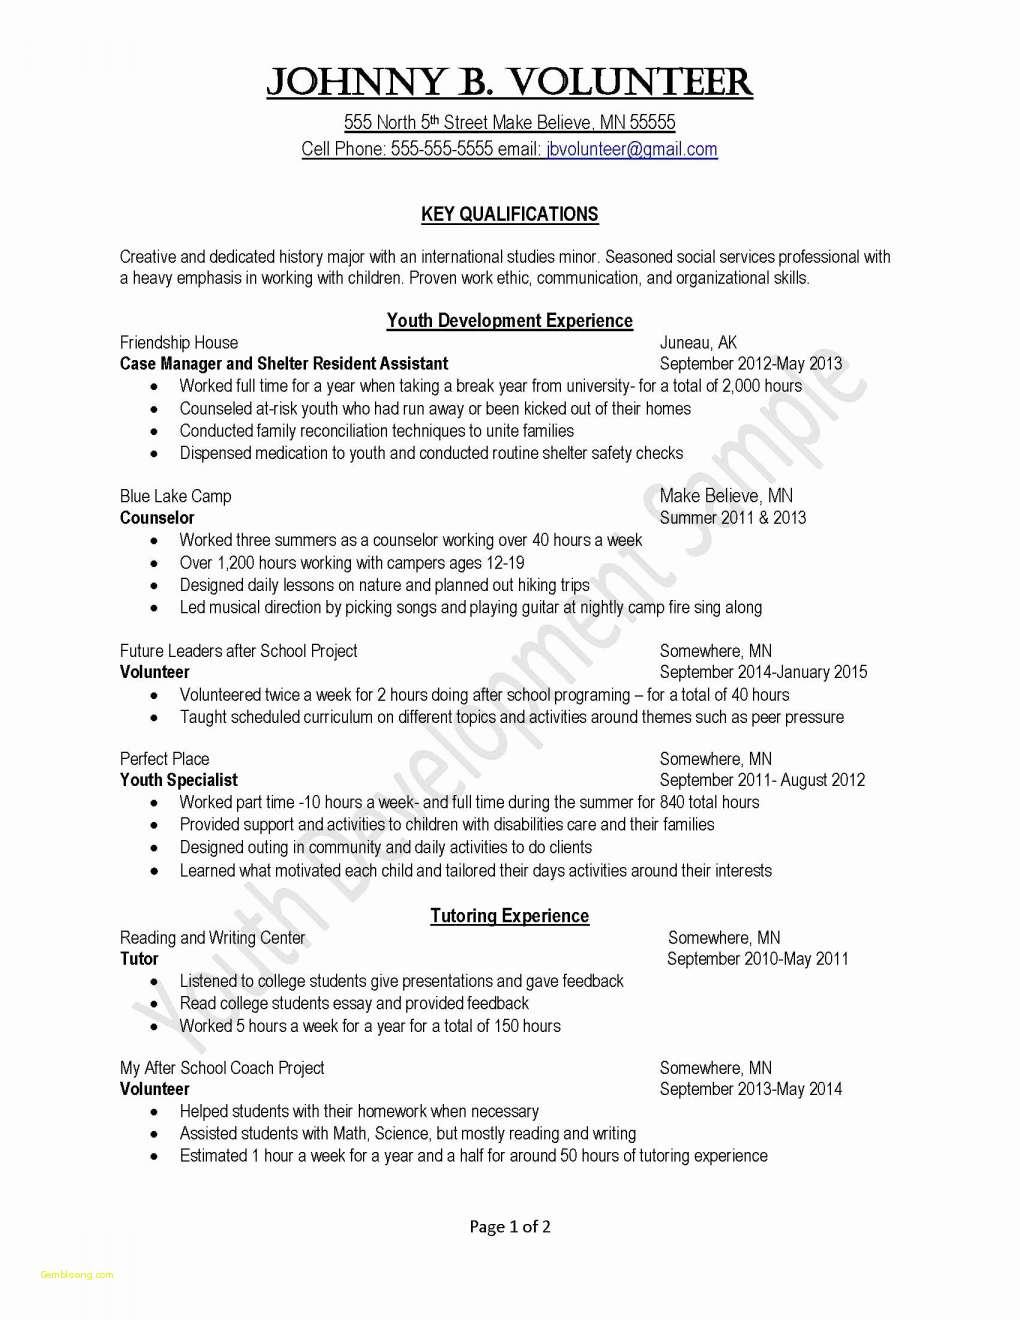 Cover Letter Template 2018 - Free Resume Templates for Students Takenosumi